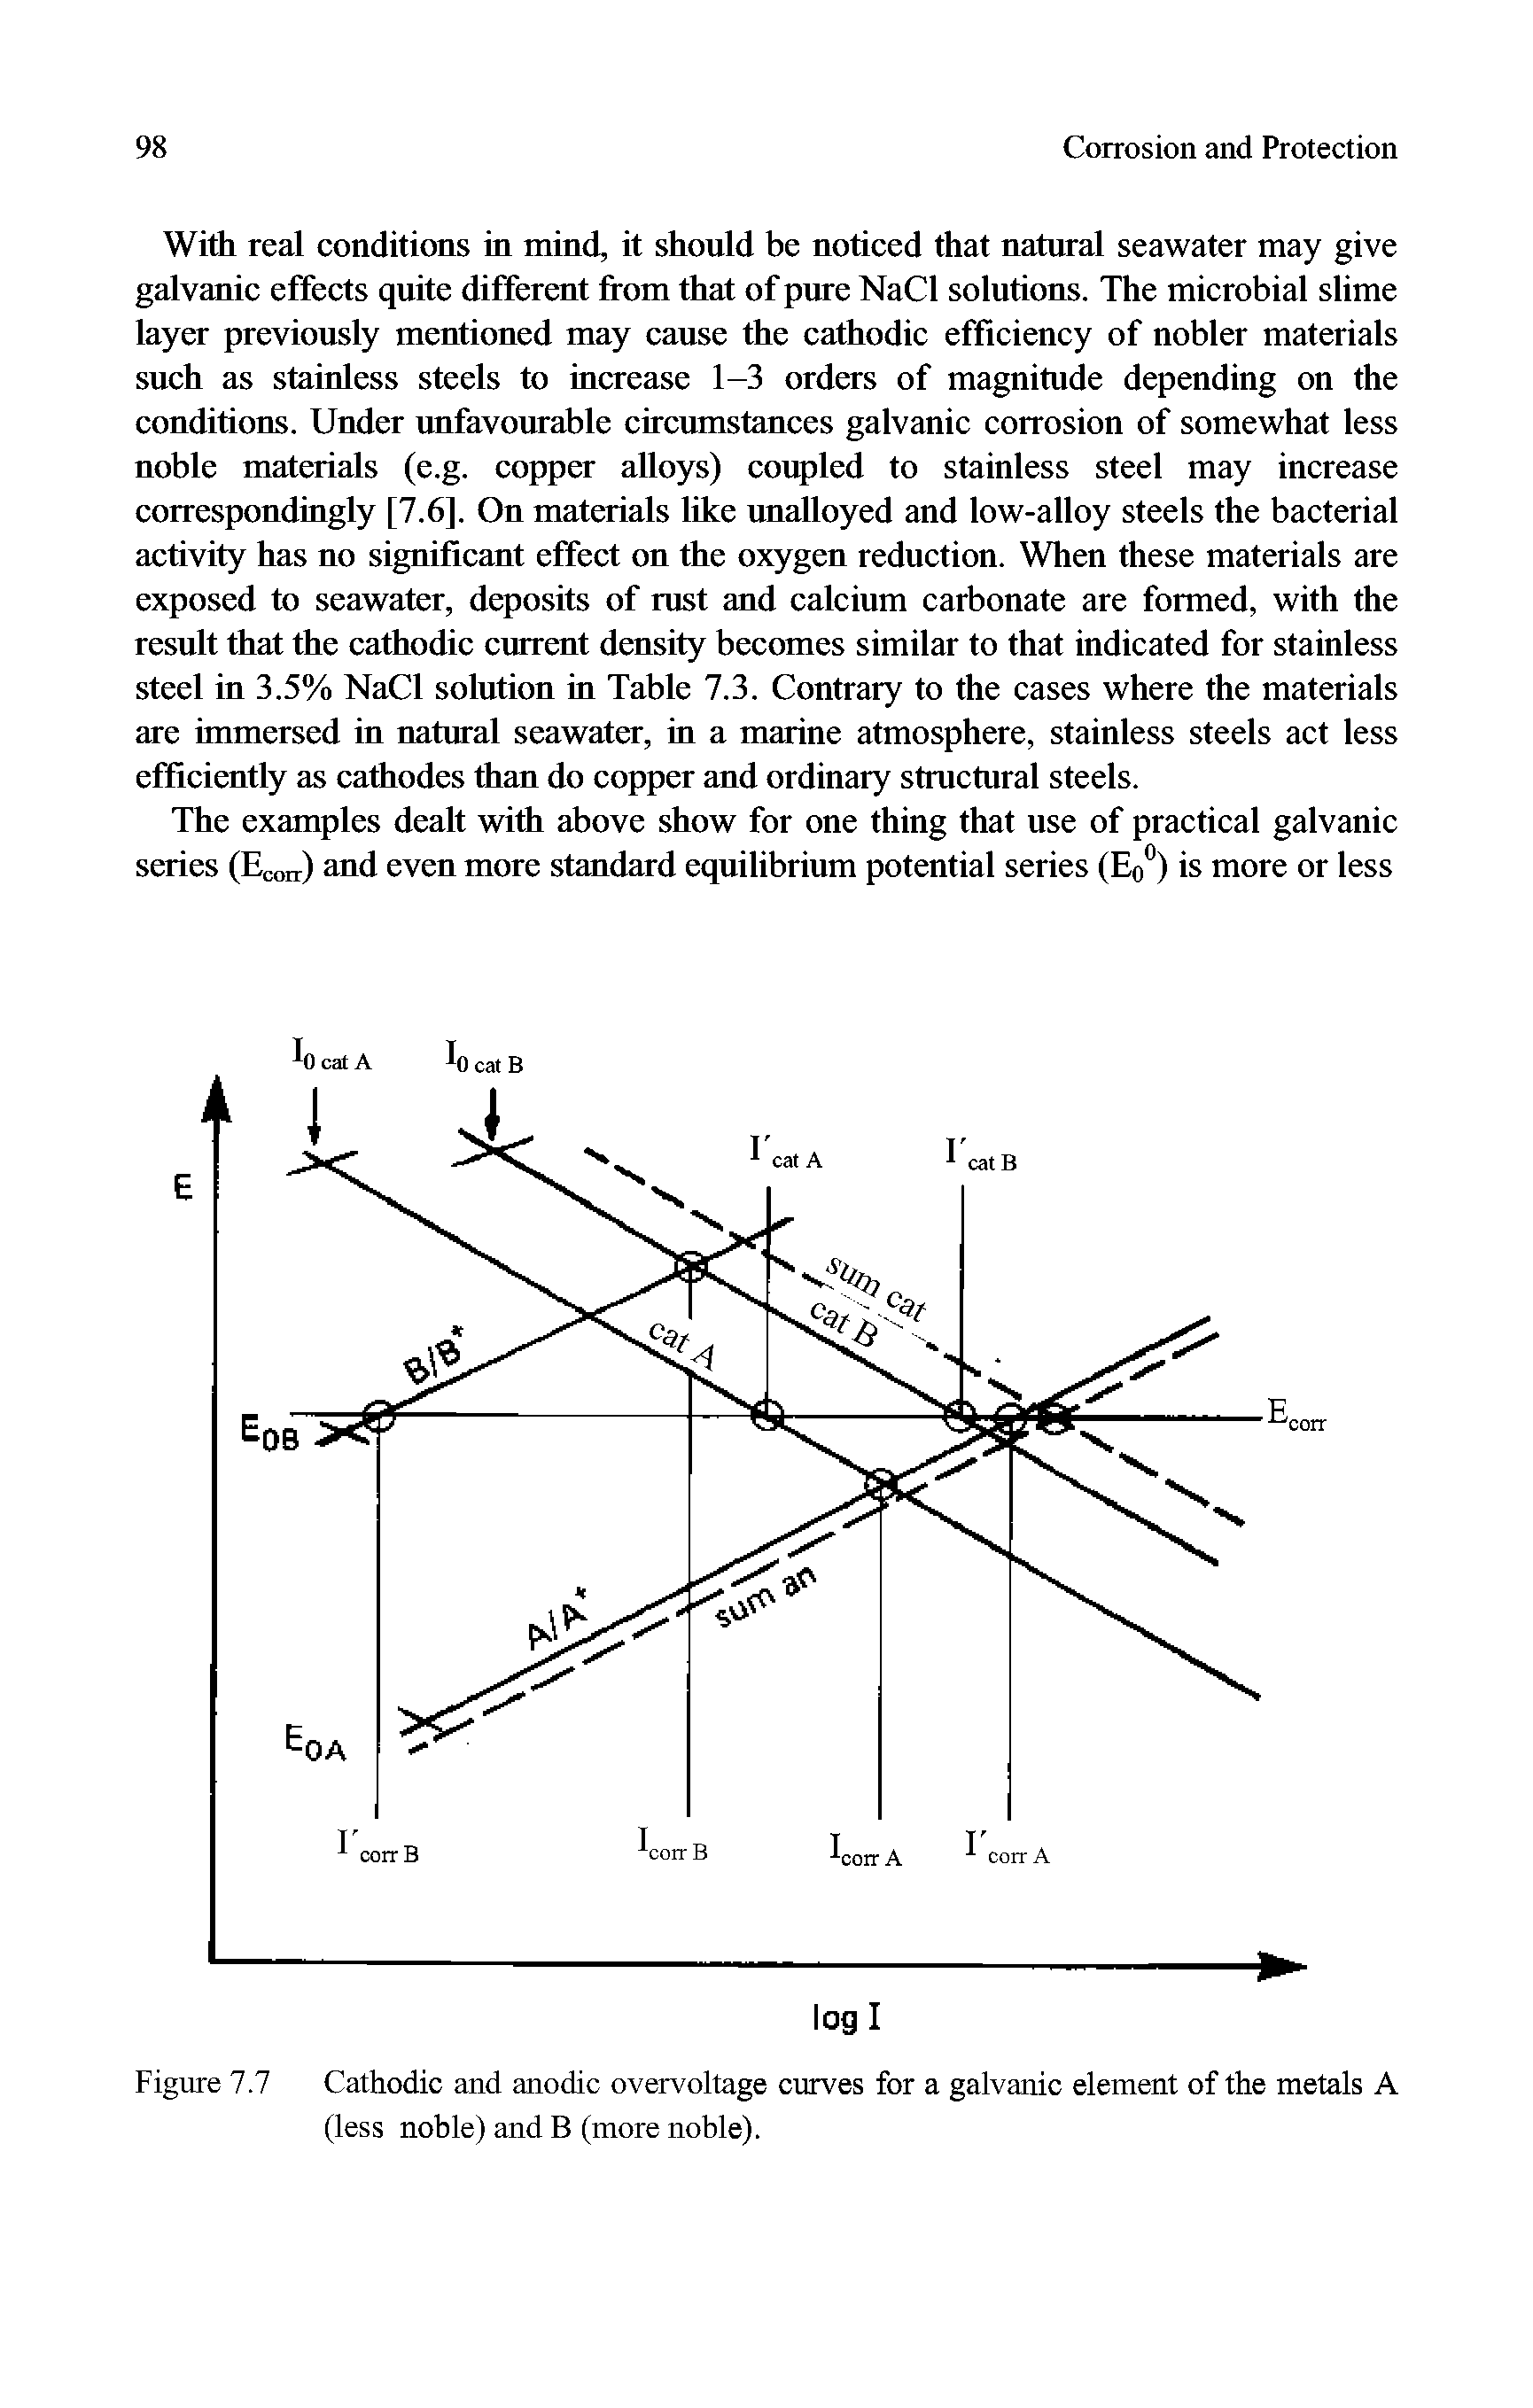 Figure 7.7 Cathodic and anodic overvoltage curves for a galvanic element of the metals A (less nohle) and B (more nohle).